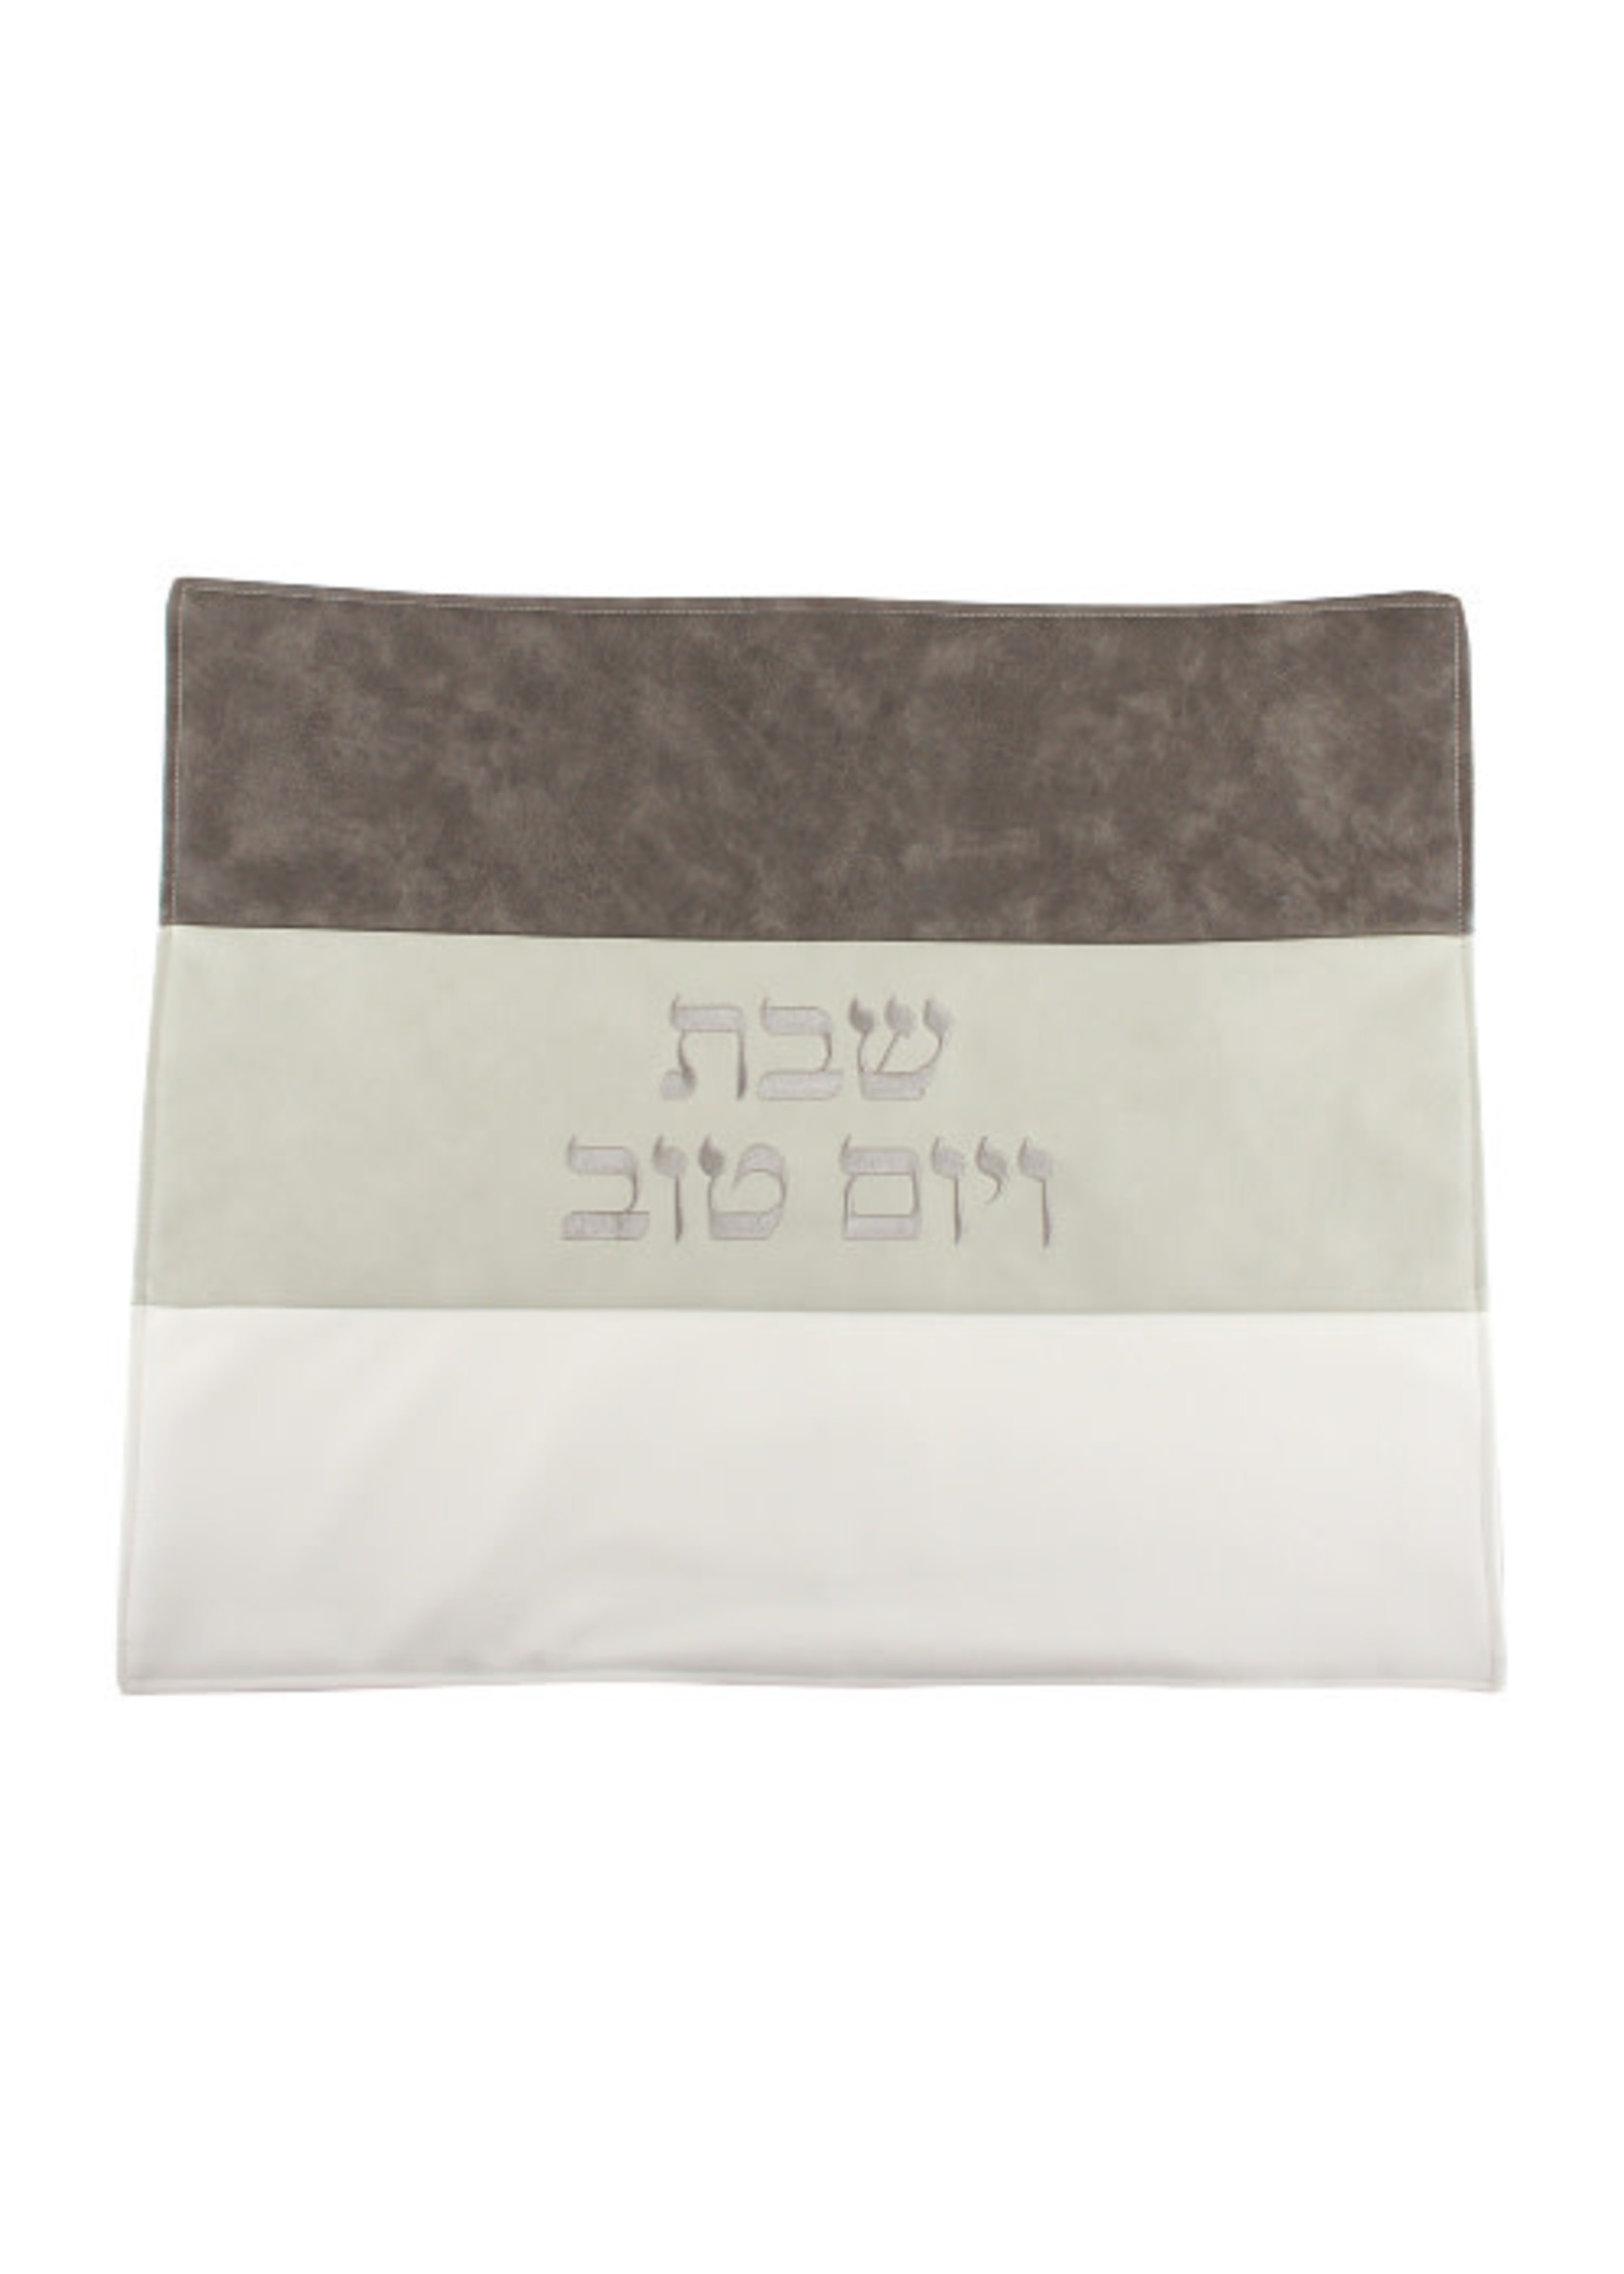 CHALLAH COVER LEATHERETTE